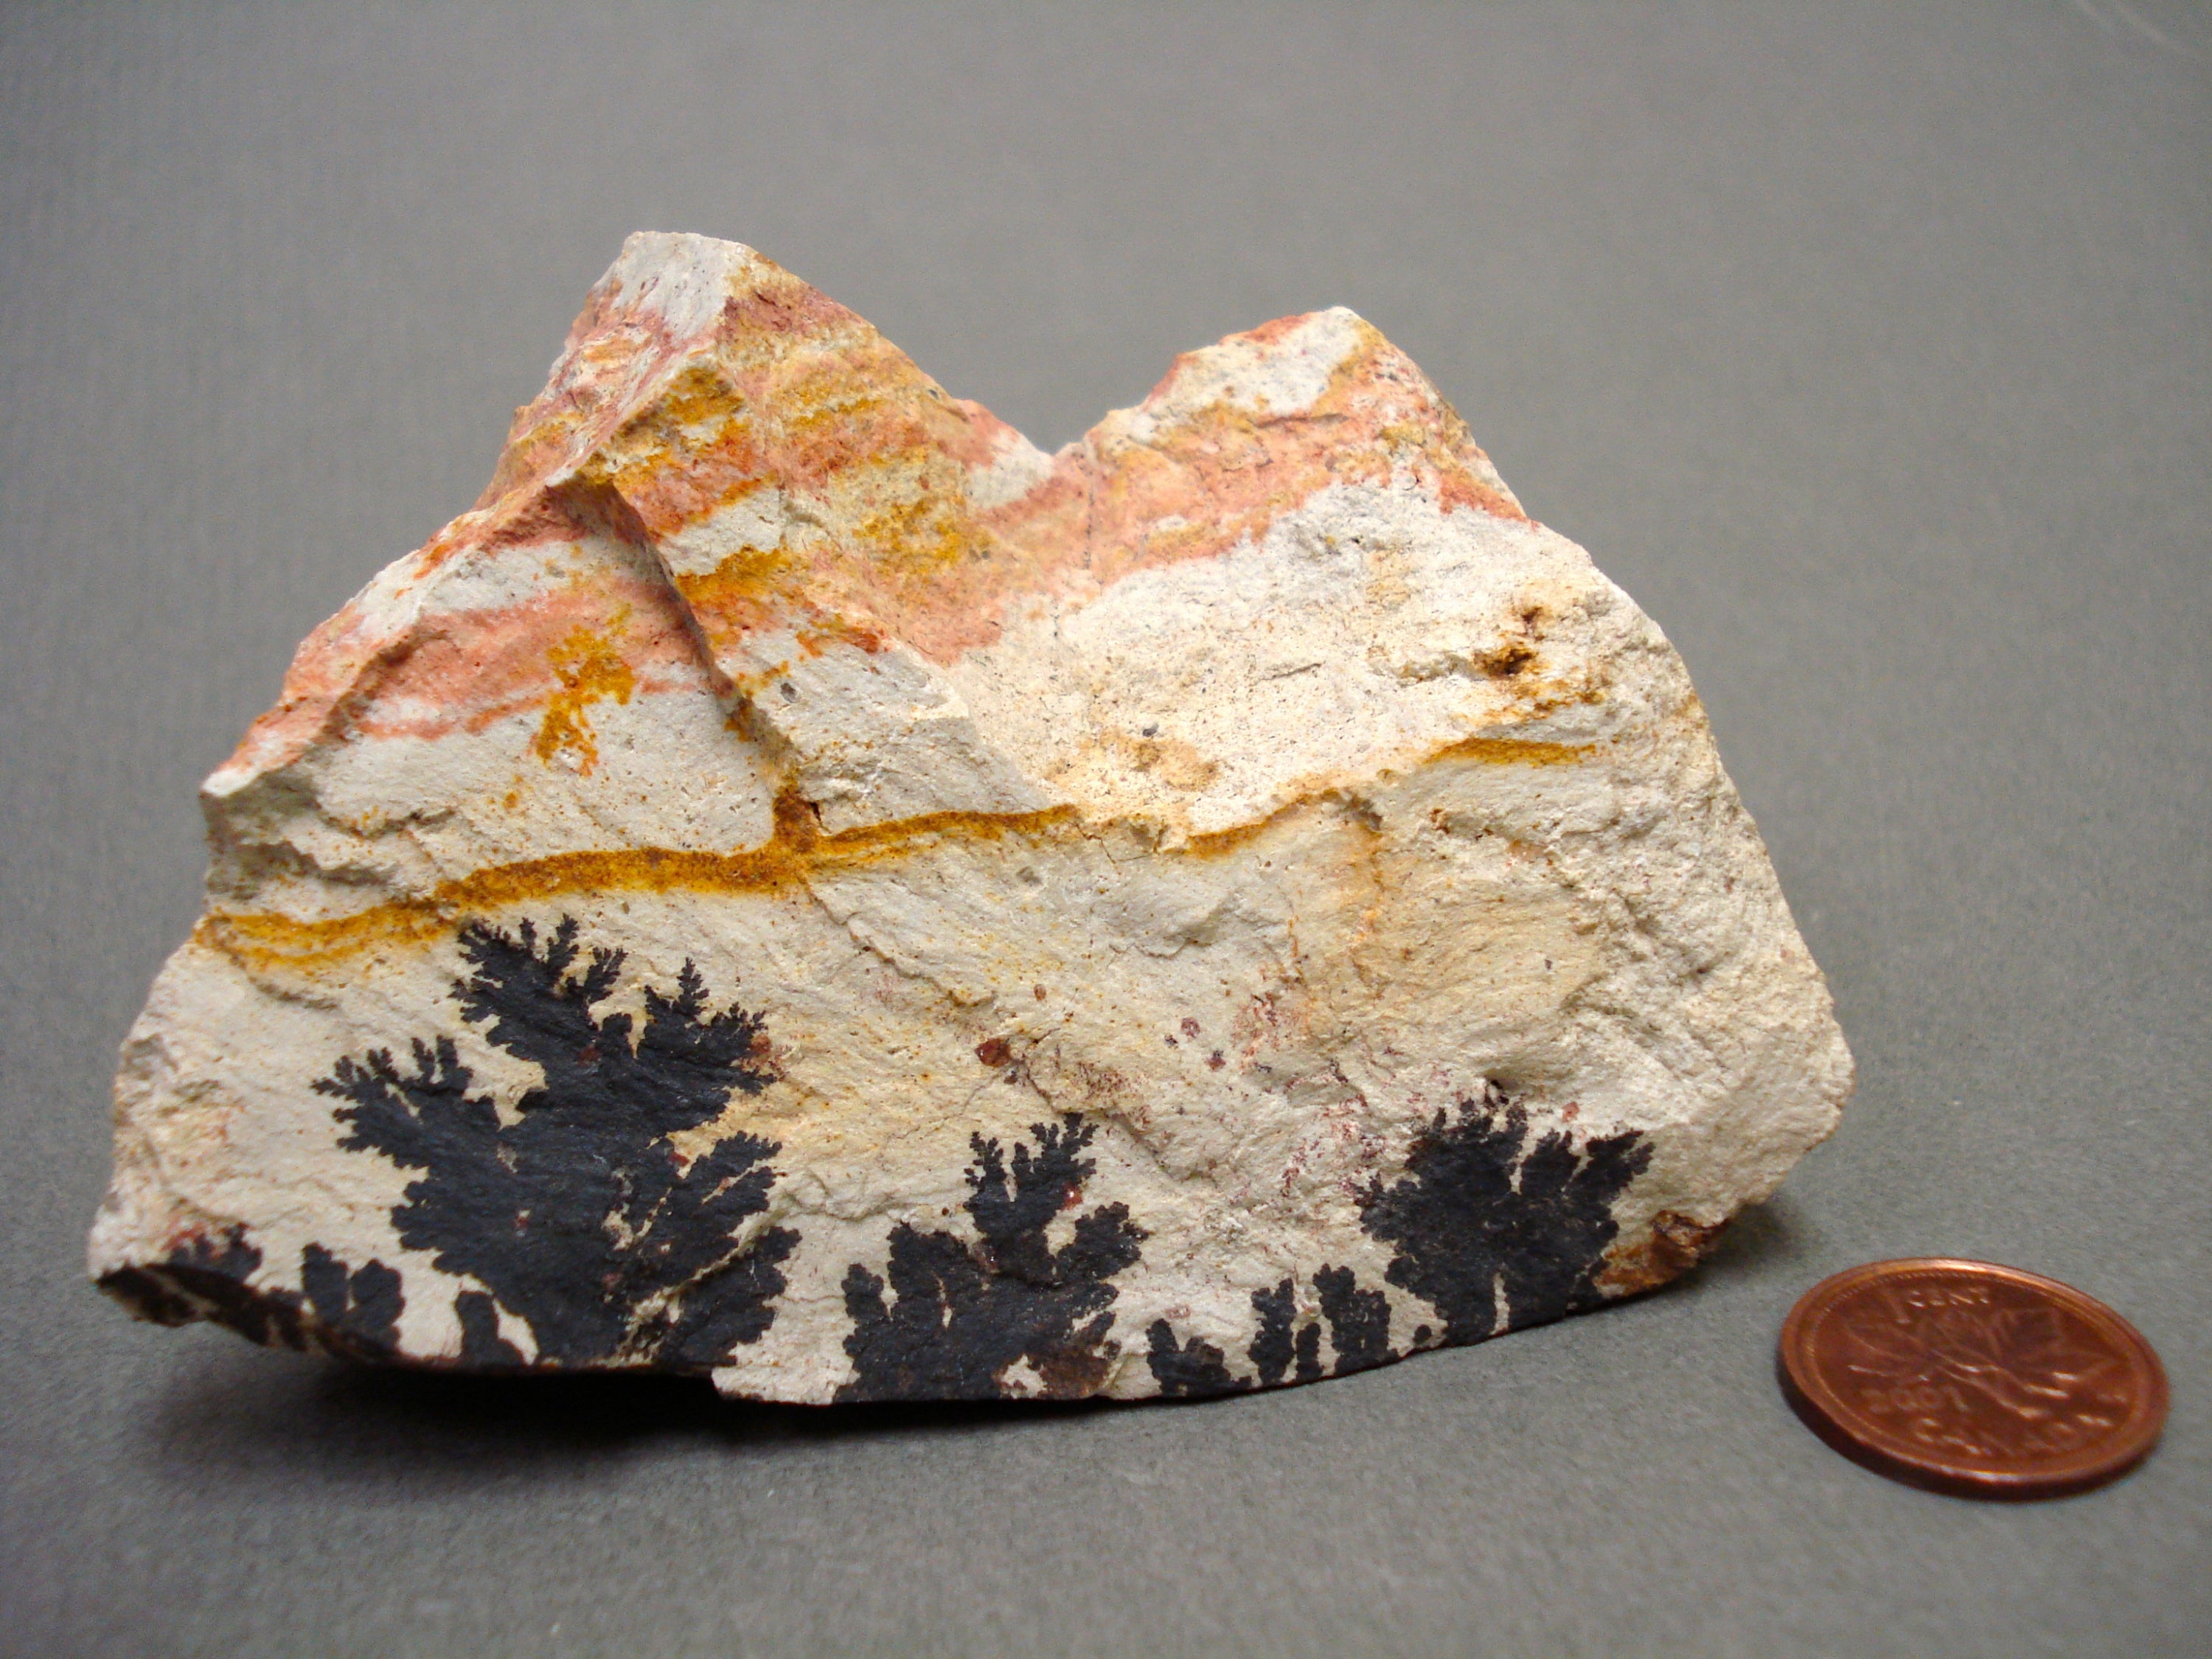 Sandstone with Dendrites next to a penny for size comparison